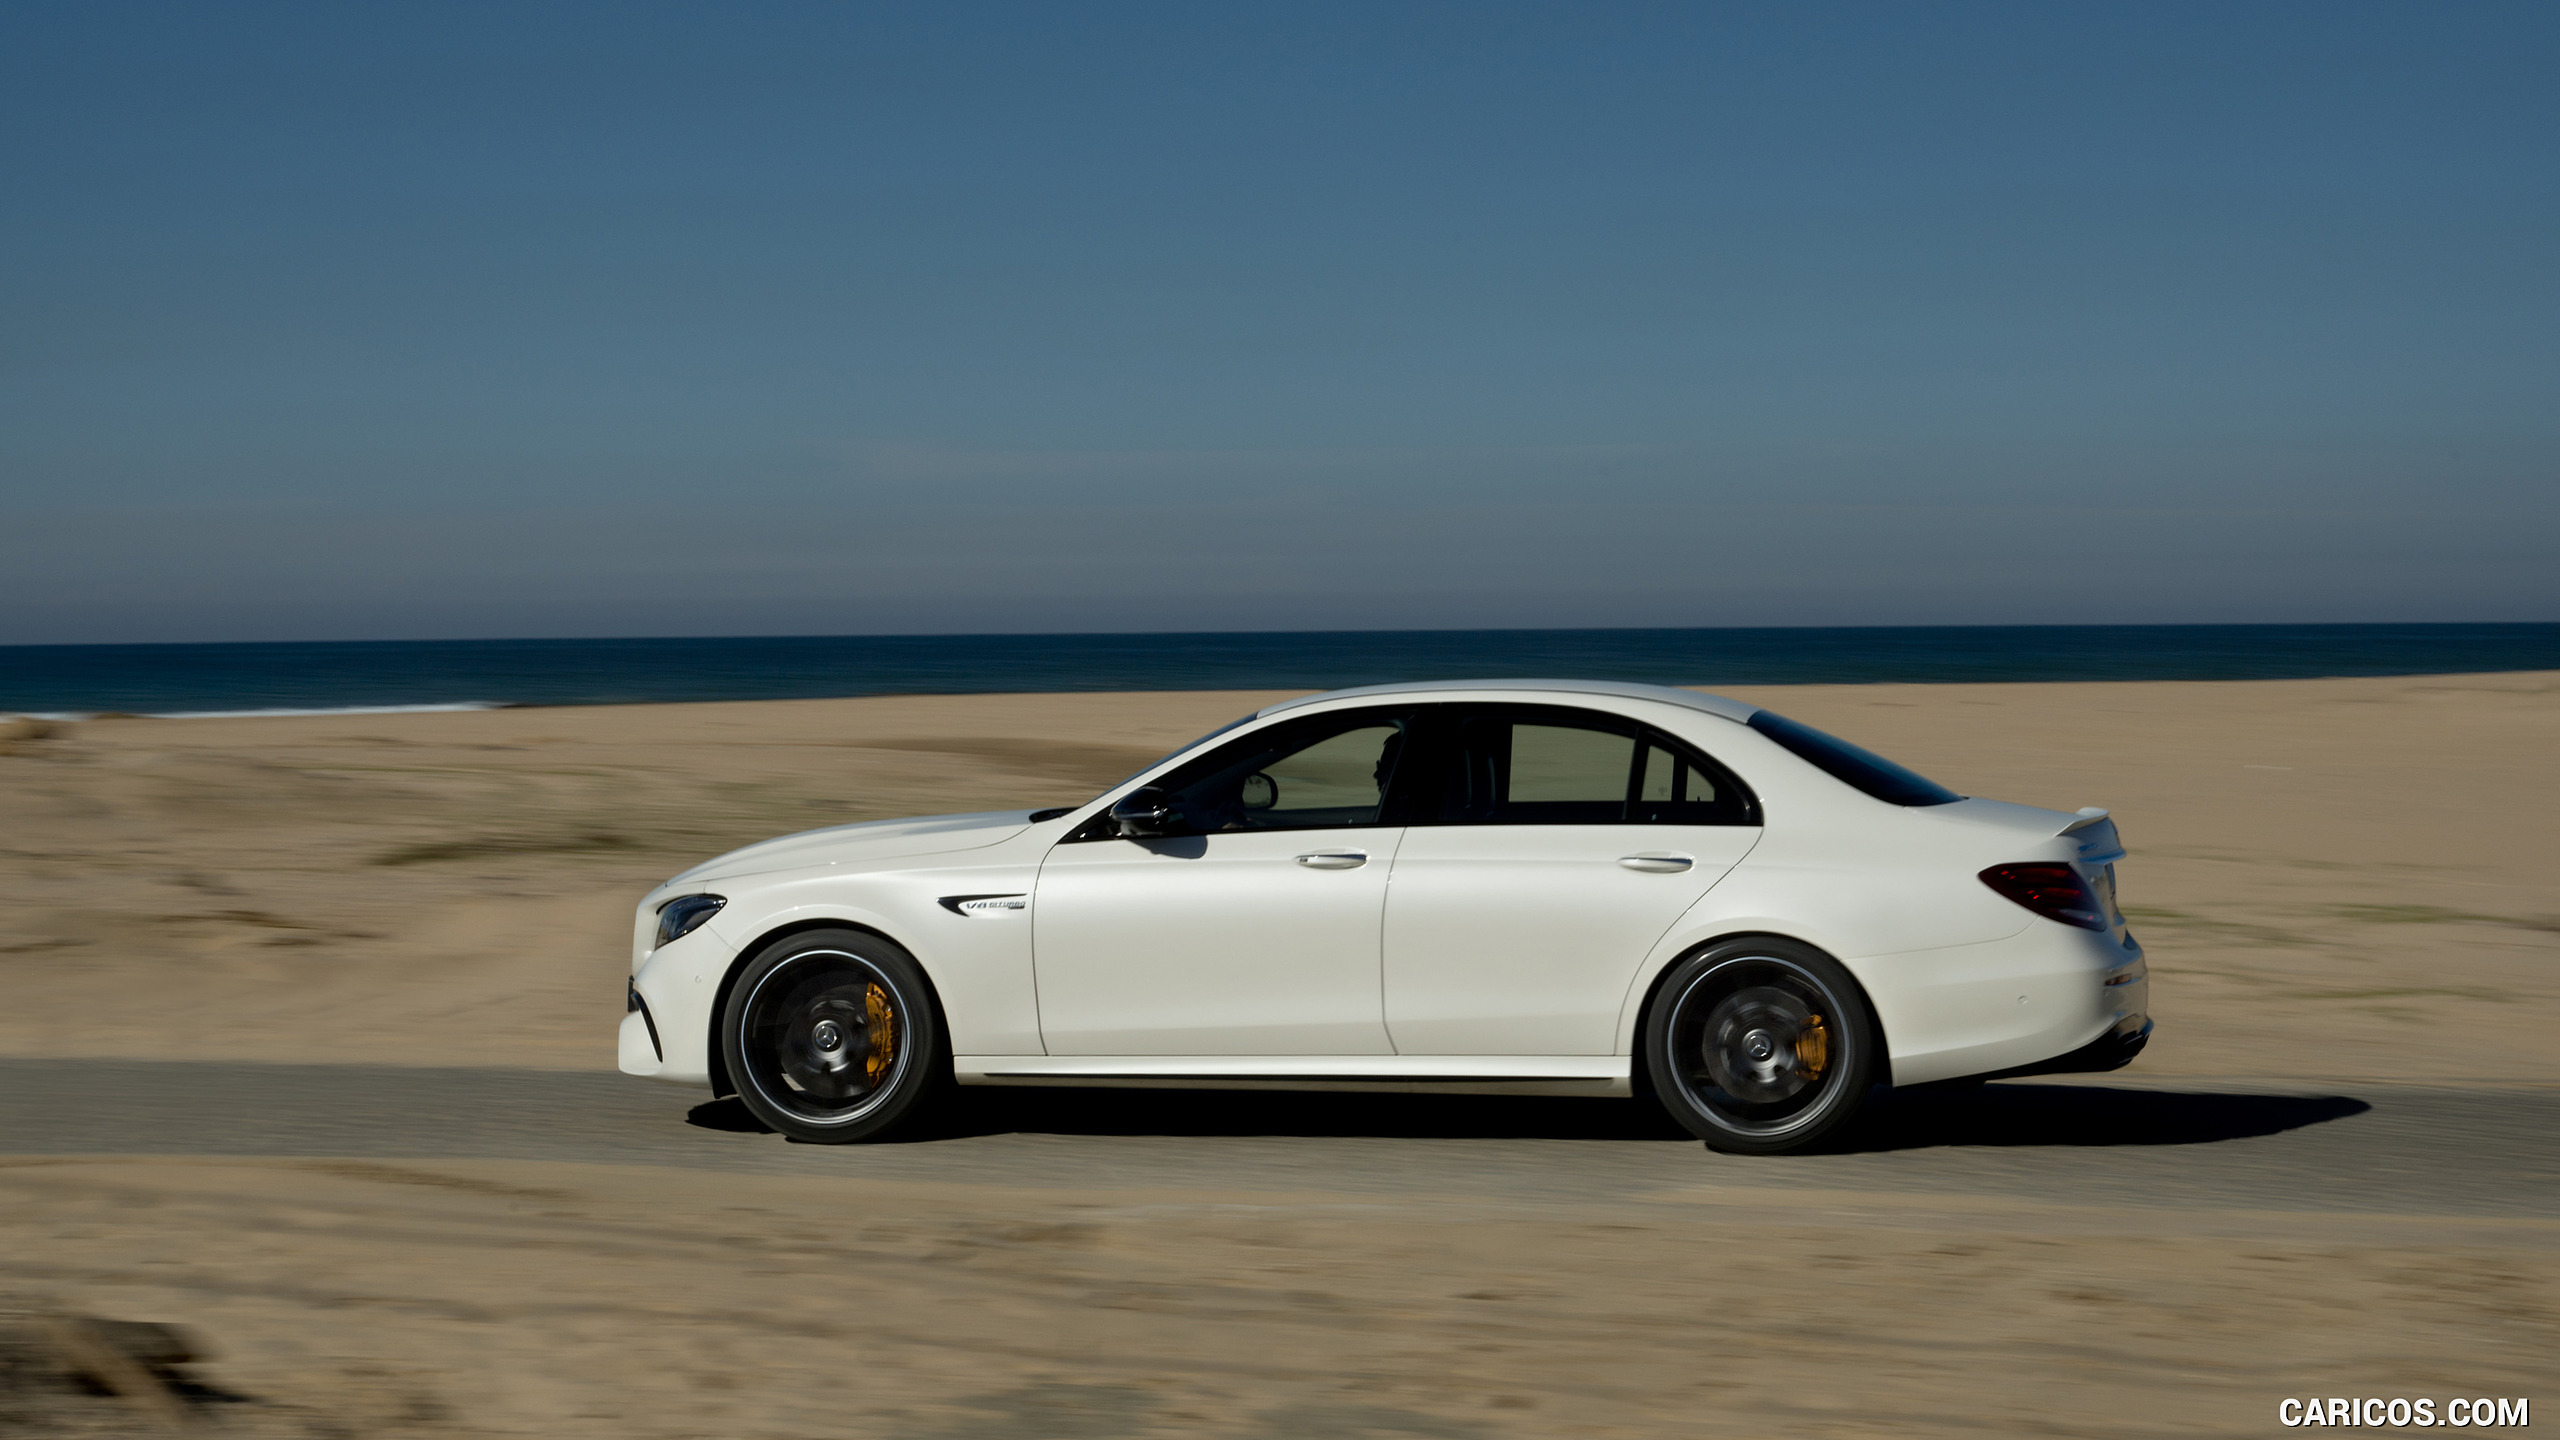 2018 Mercedes-AMG E63 S 4MATIC+ - Side, #59 of 323